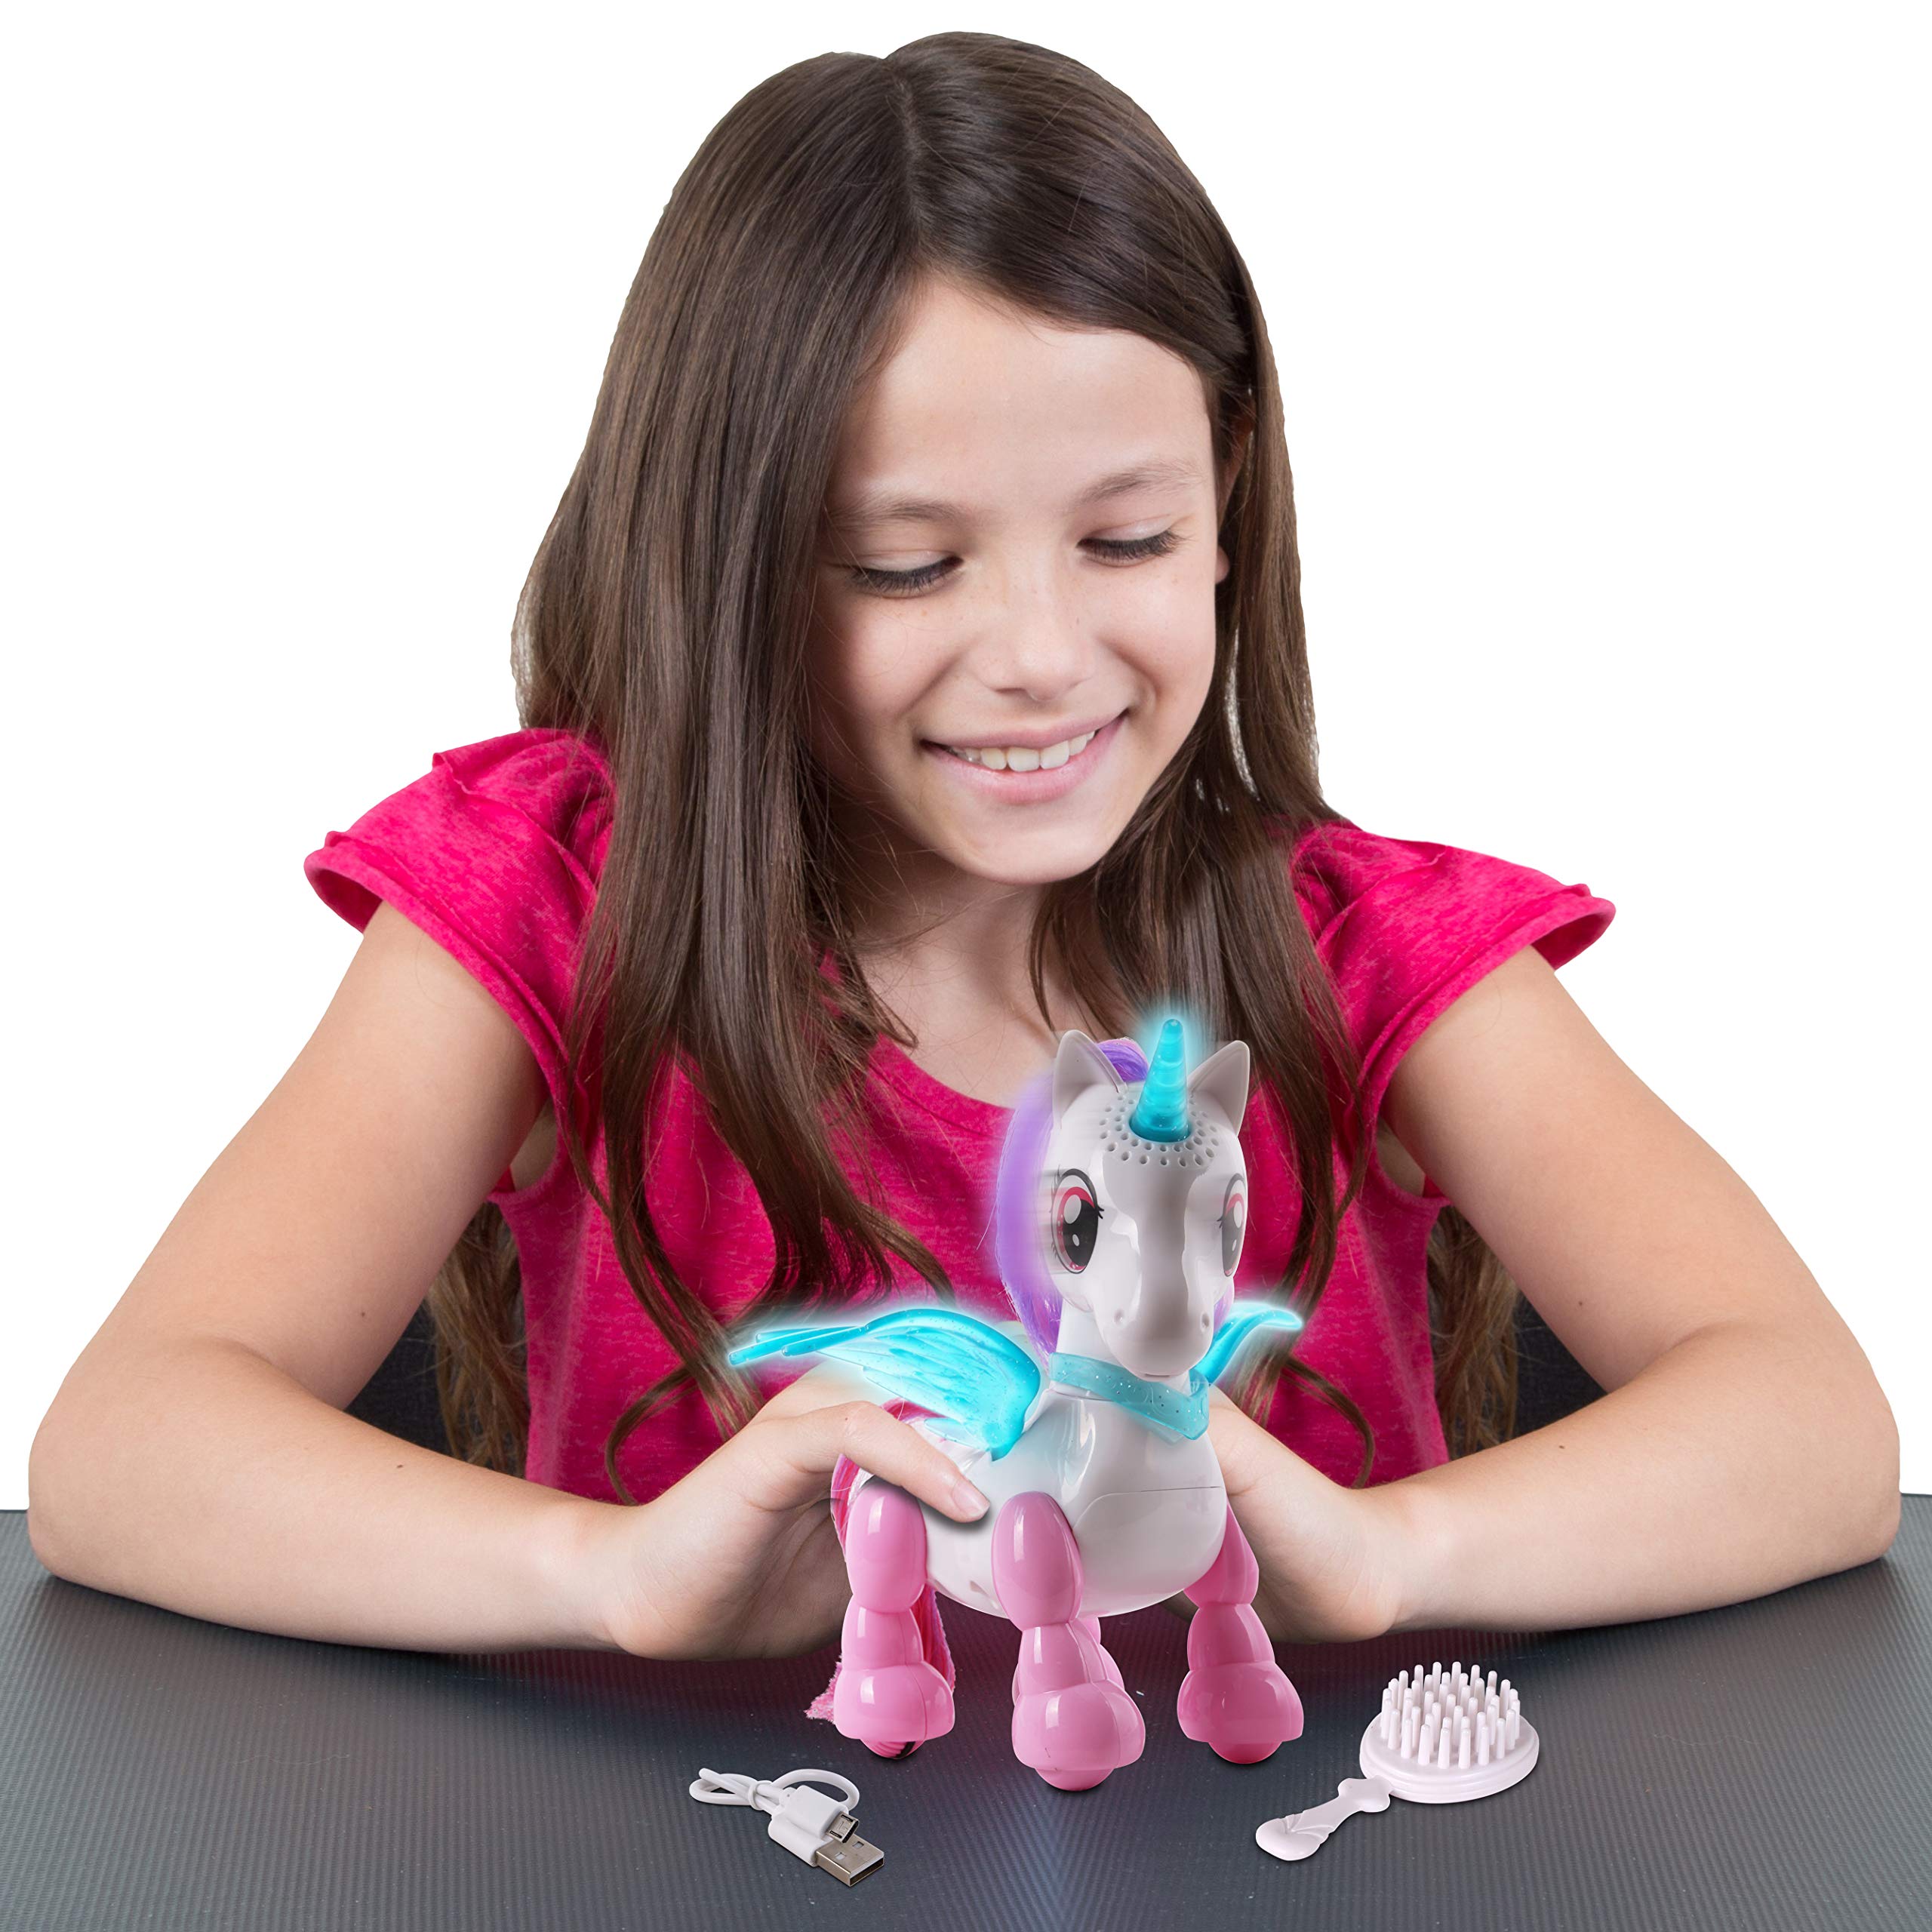 NKOK USB PetBotz - Robo Unicorn, Rechargeable, Miniature, Interactive pet Robot, Lights up, Sound Activated, Makes Noises on Command, Comes with Necklace and Hair Brush, USB Charger Included